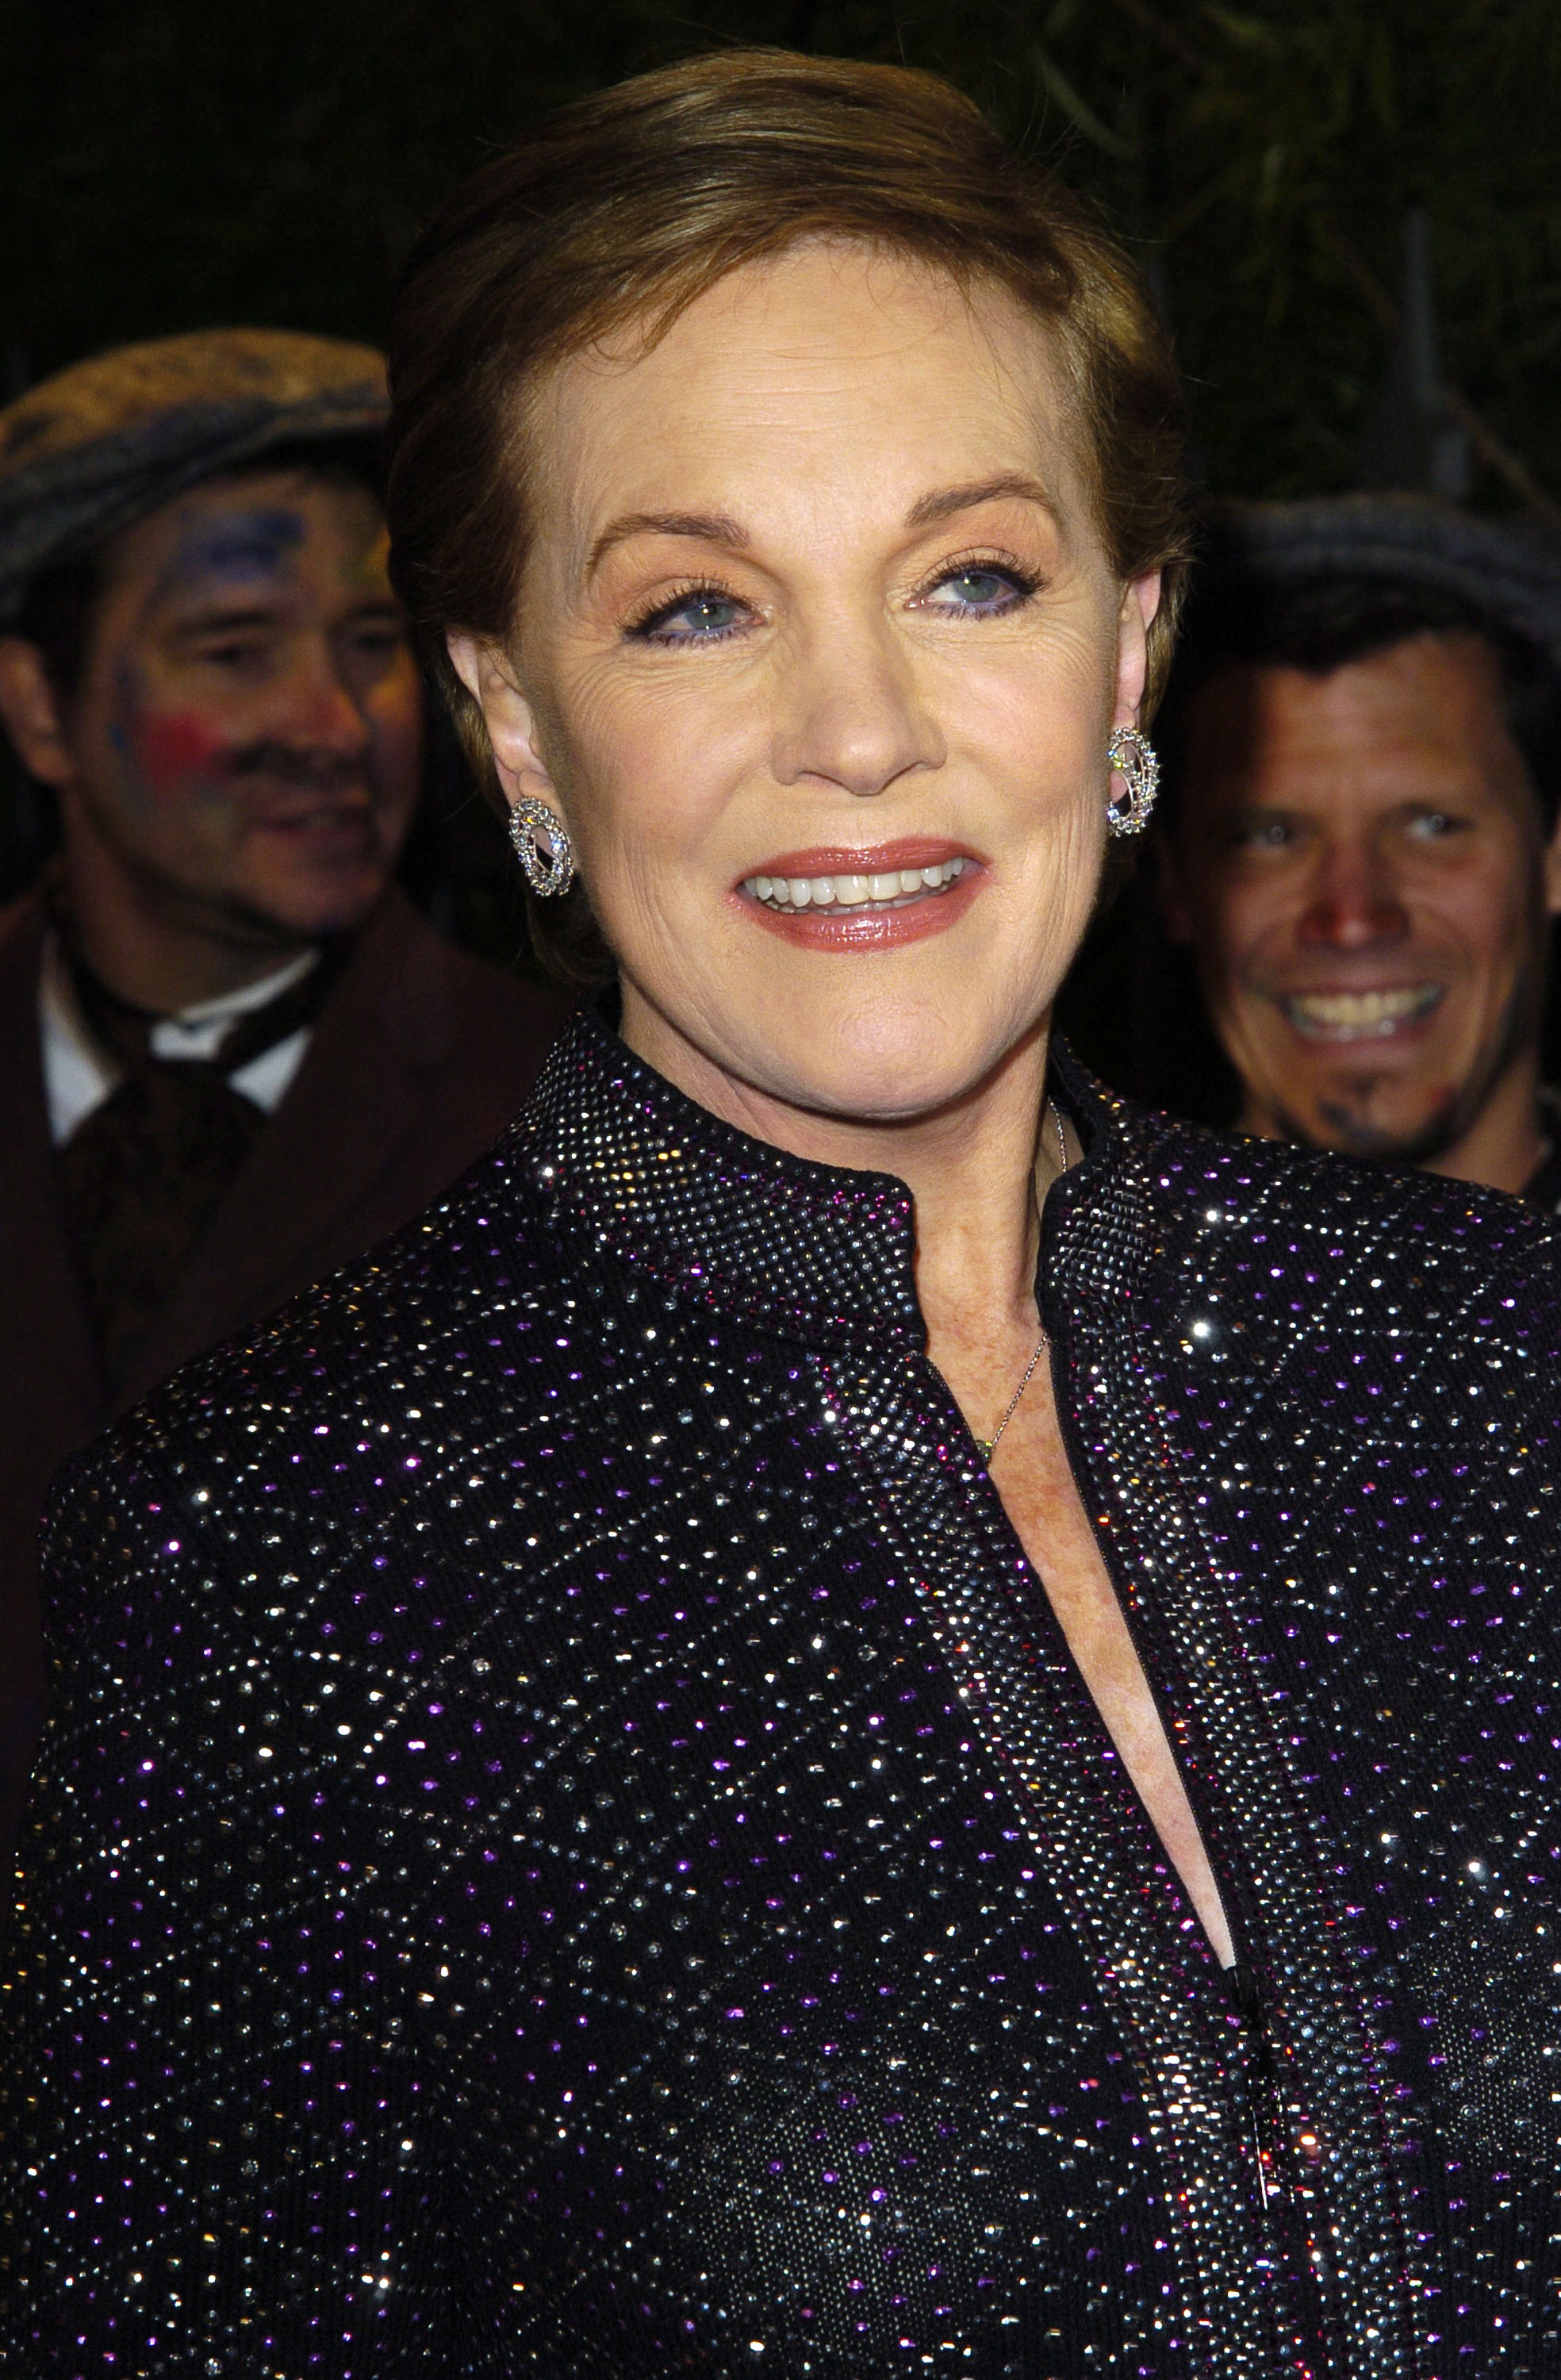 Julie Andrews in California in 2004 | Source: Getty Images